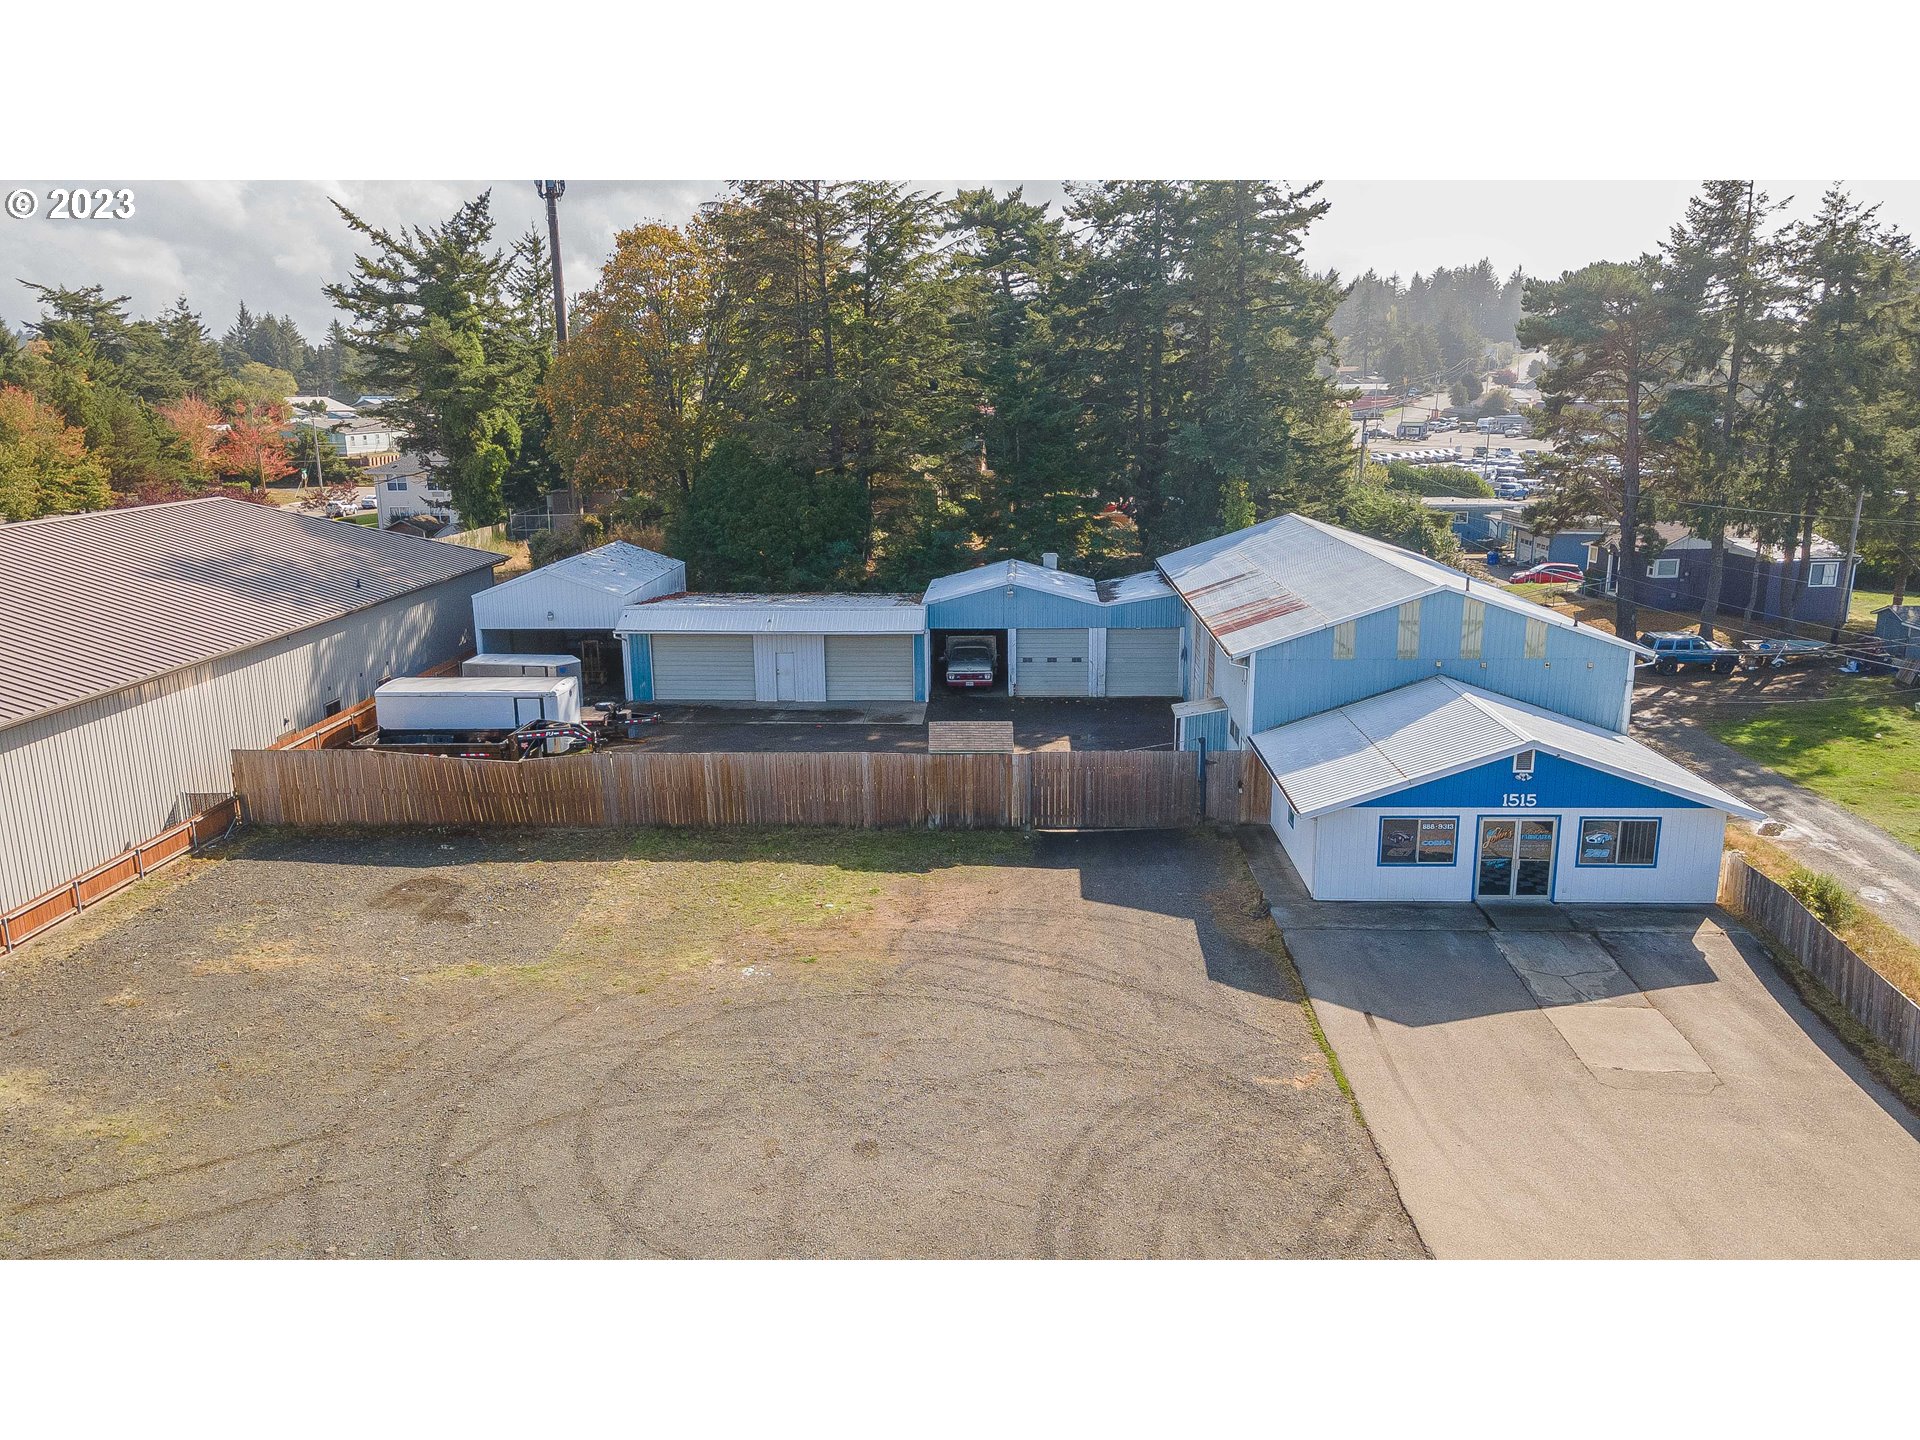 1515 NEWMARK AVE, Coos Bay, OR 97420